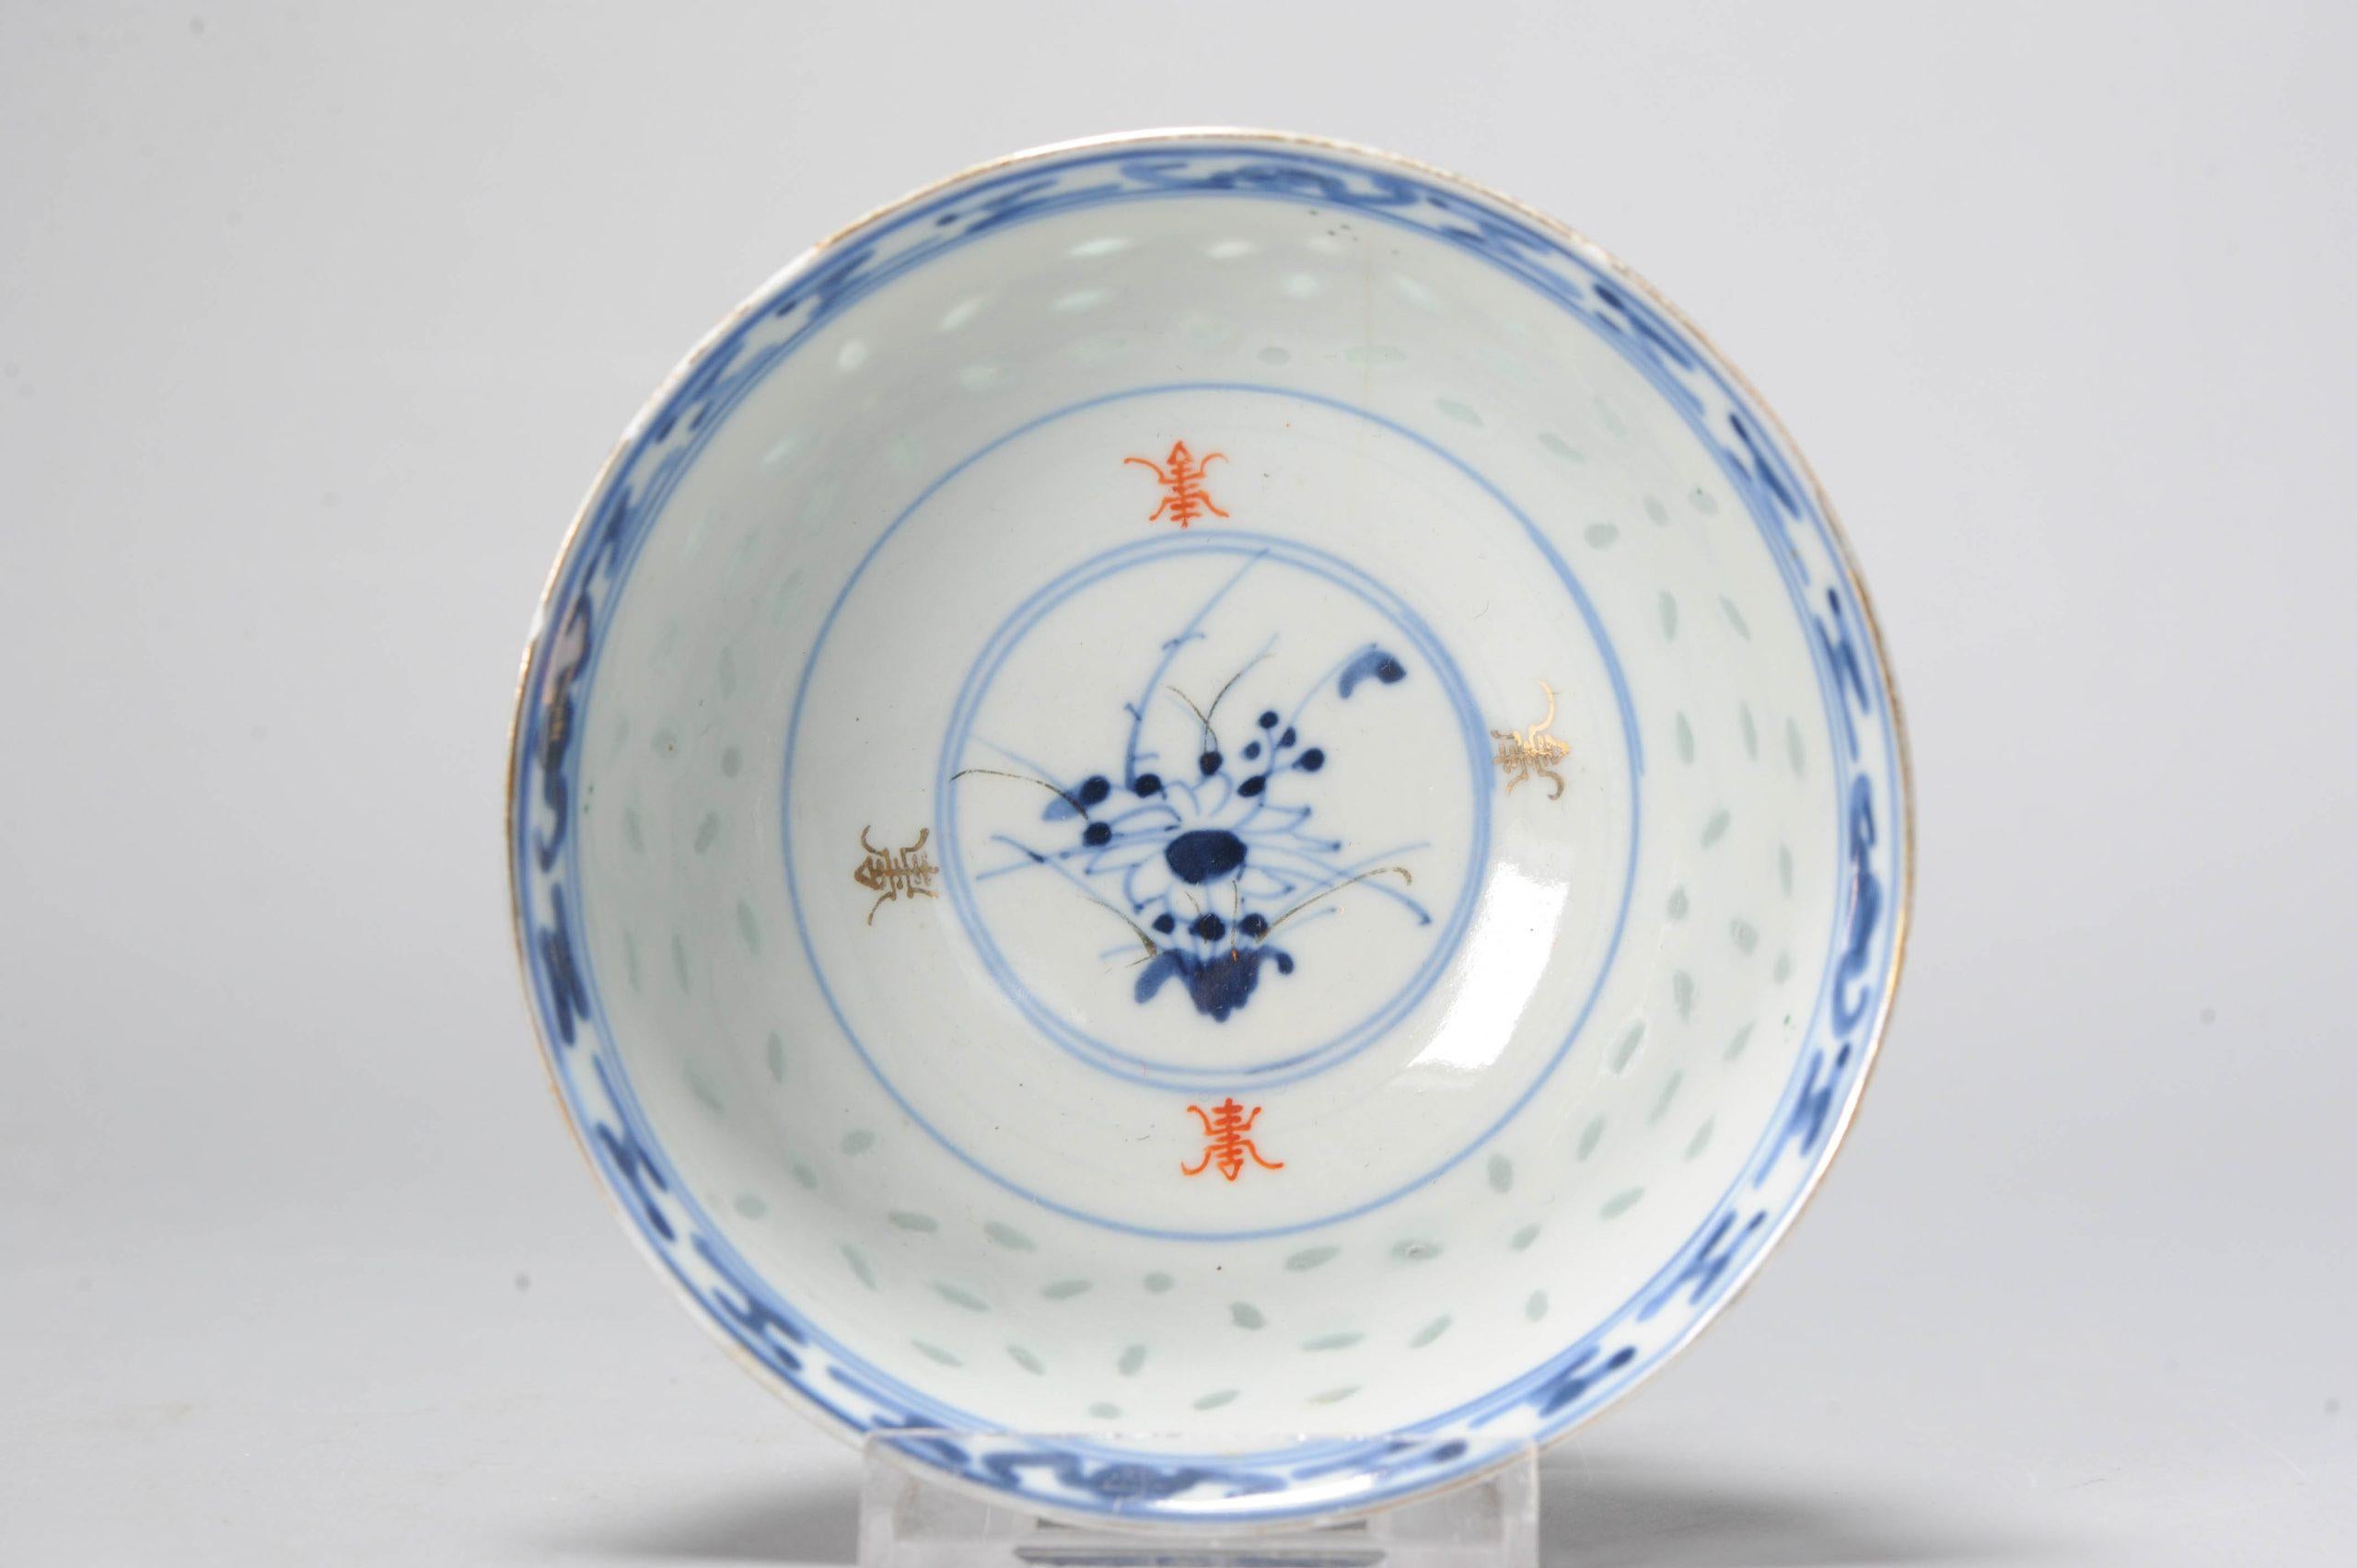 Antique Chinese Republic Period Rice Grain Bowl with Flowers, China 20th Century In Good Condition For Sale In Amsterdam, Noord Holland